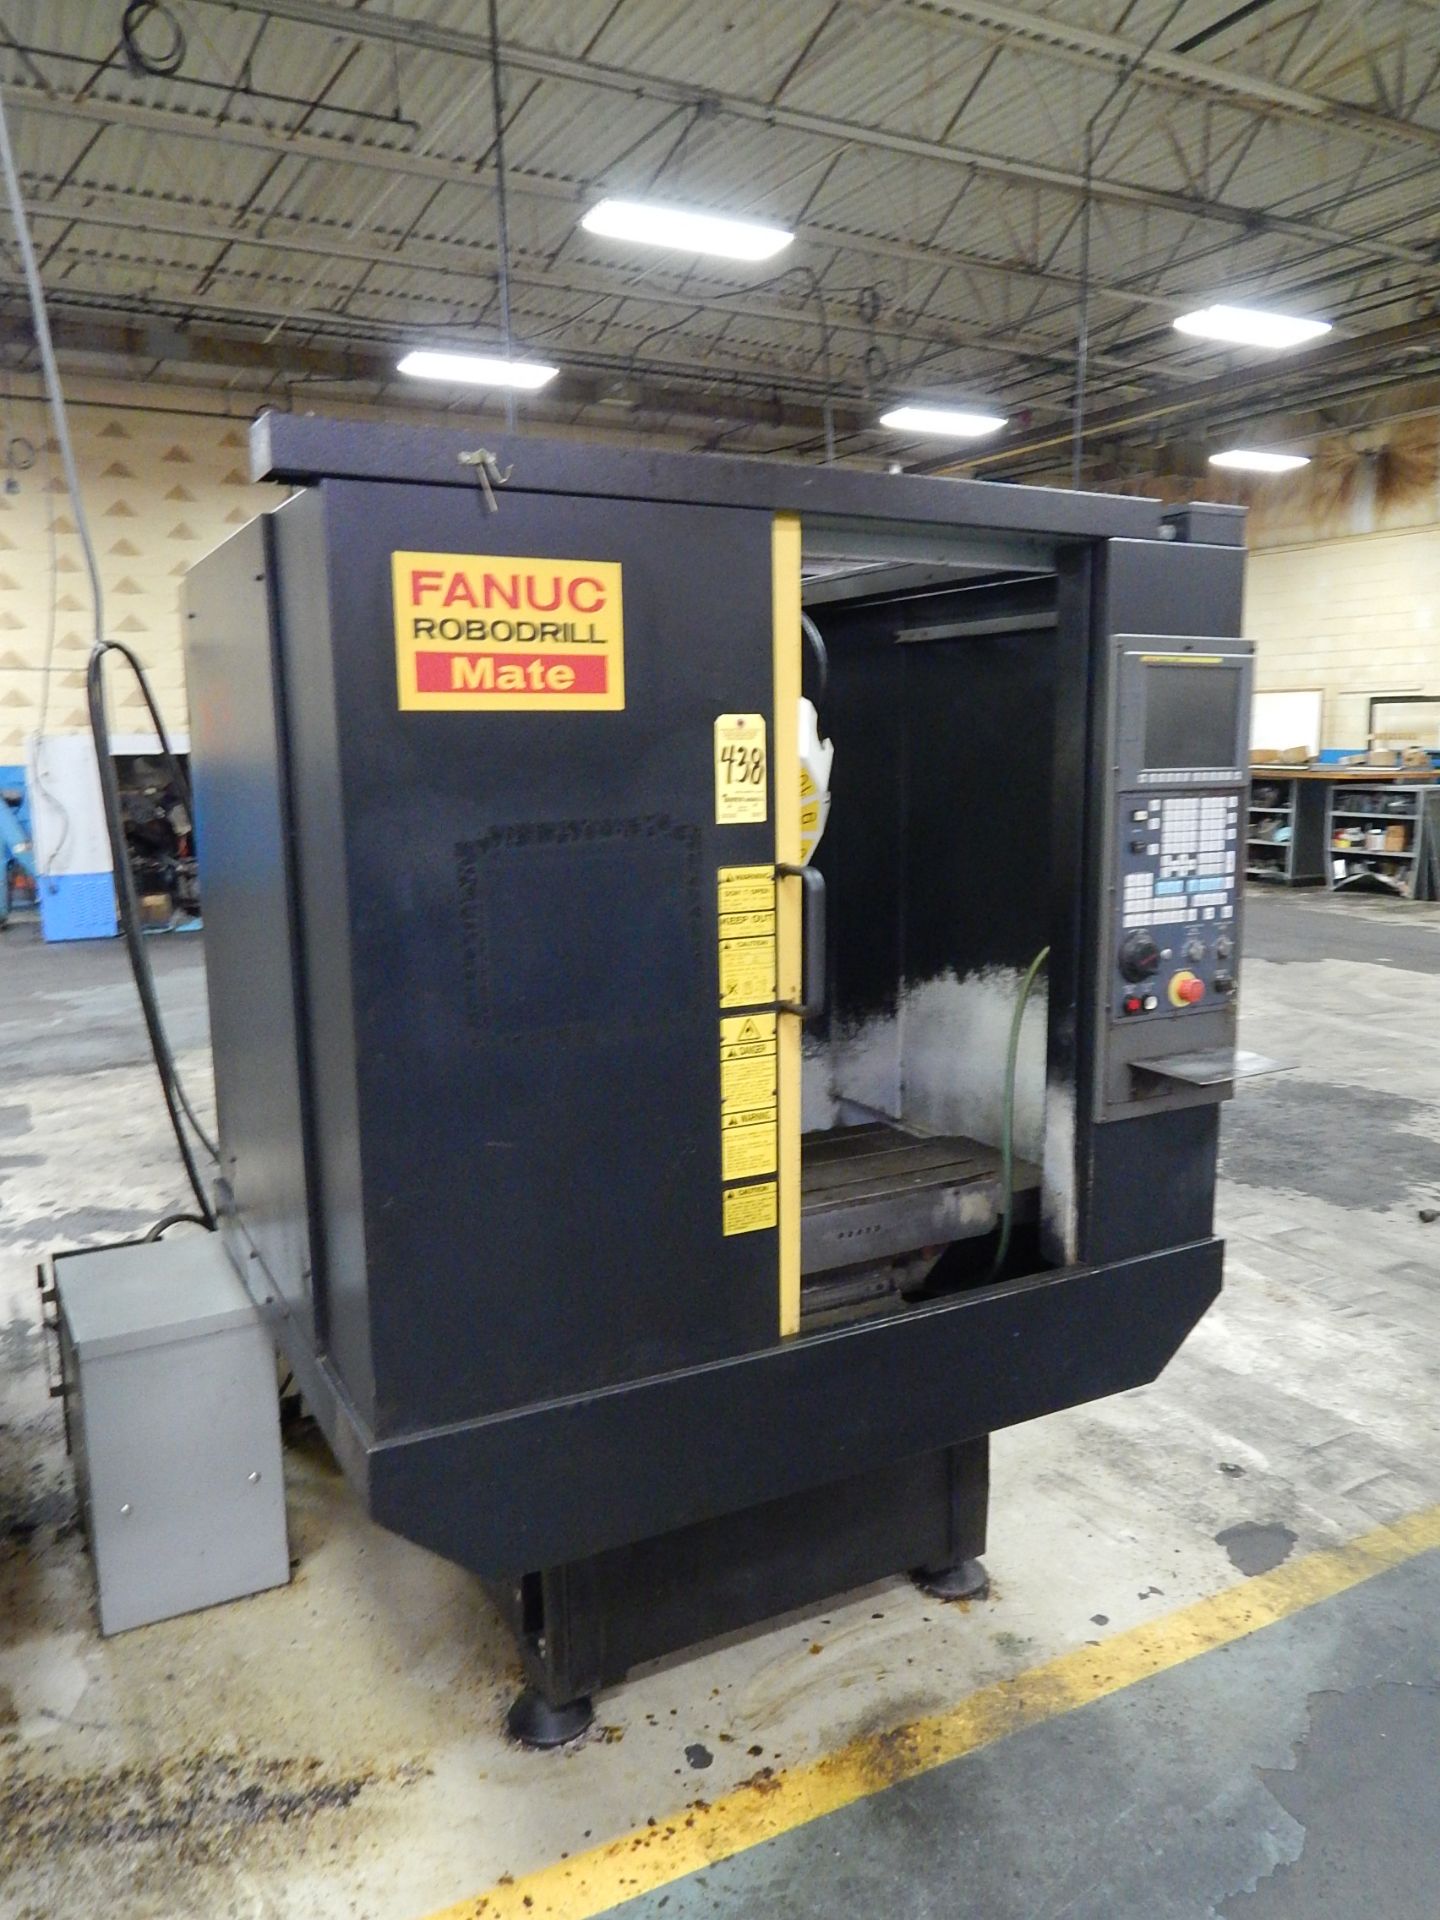 Fanuc Robodrill Mate CNC Drilling and Tapping Machine, s/n P06YN096, New 2006, Fanuc 0-MC CNC - Image 3 of 8